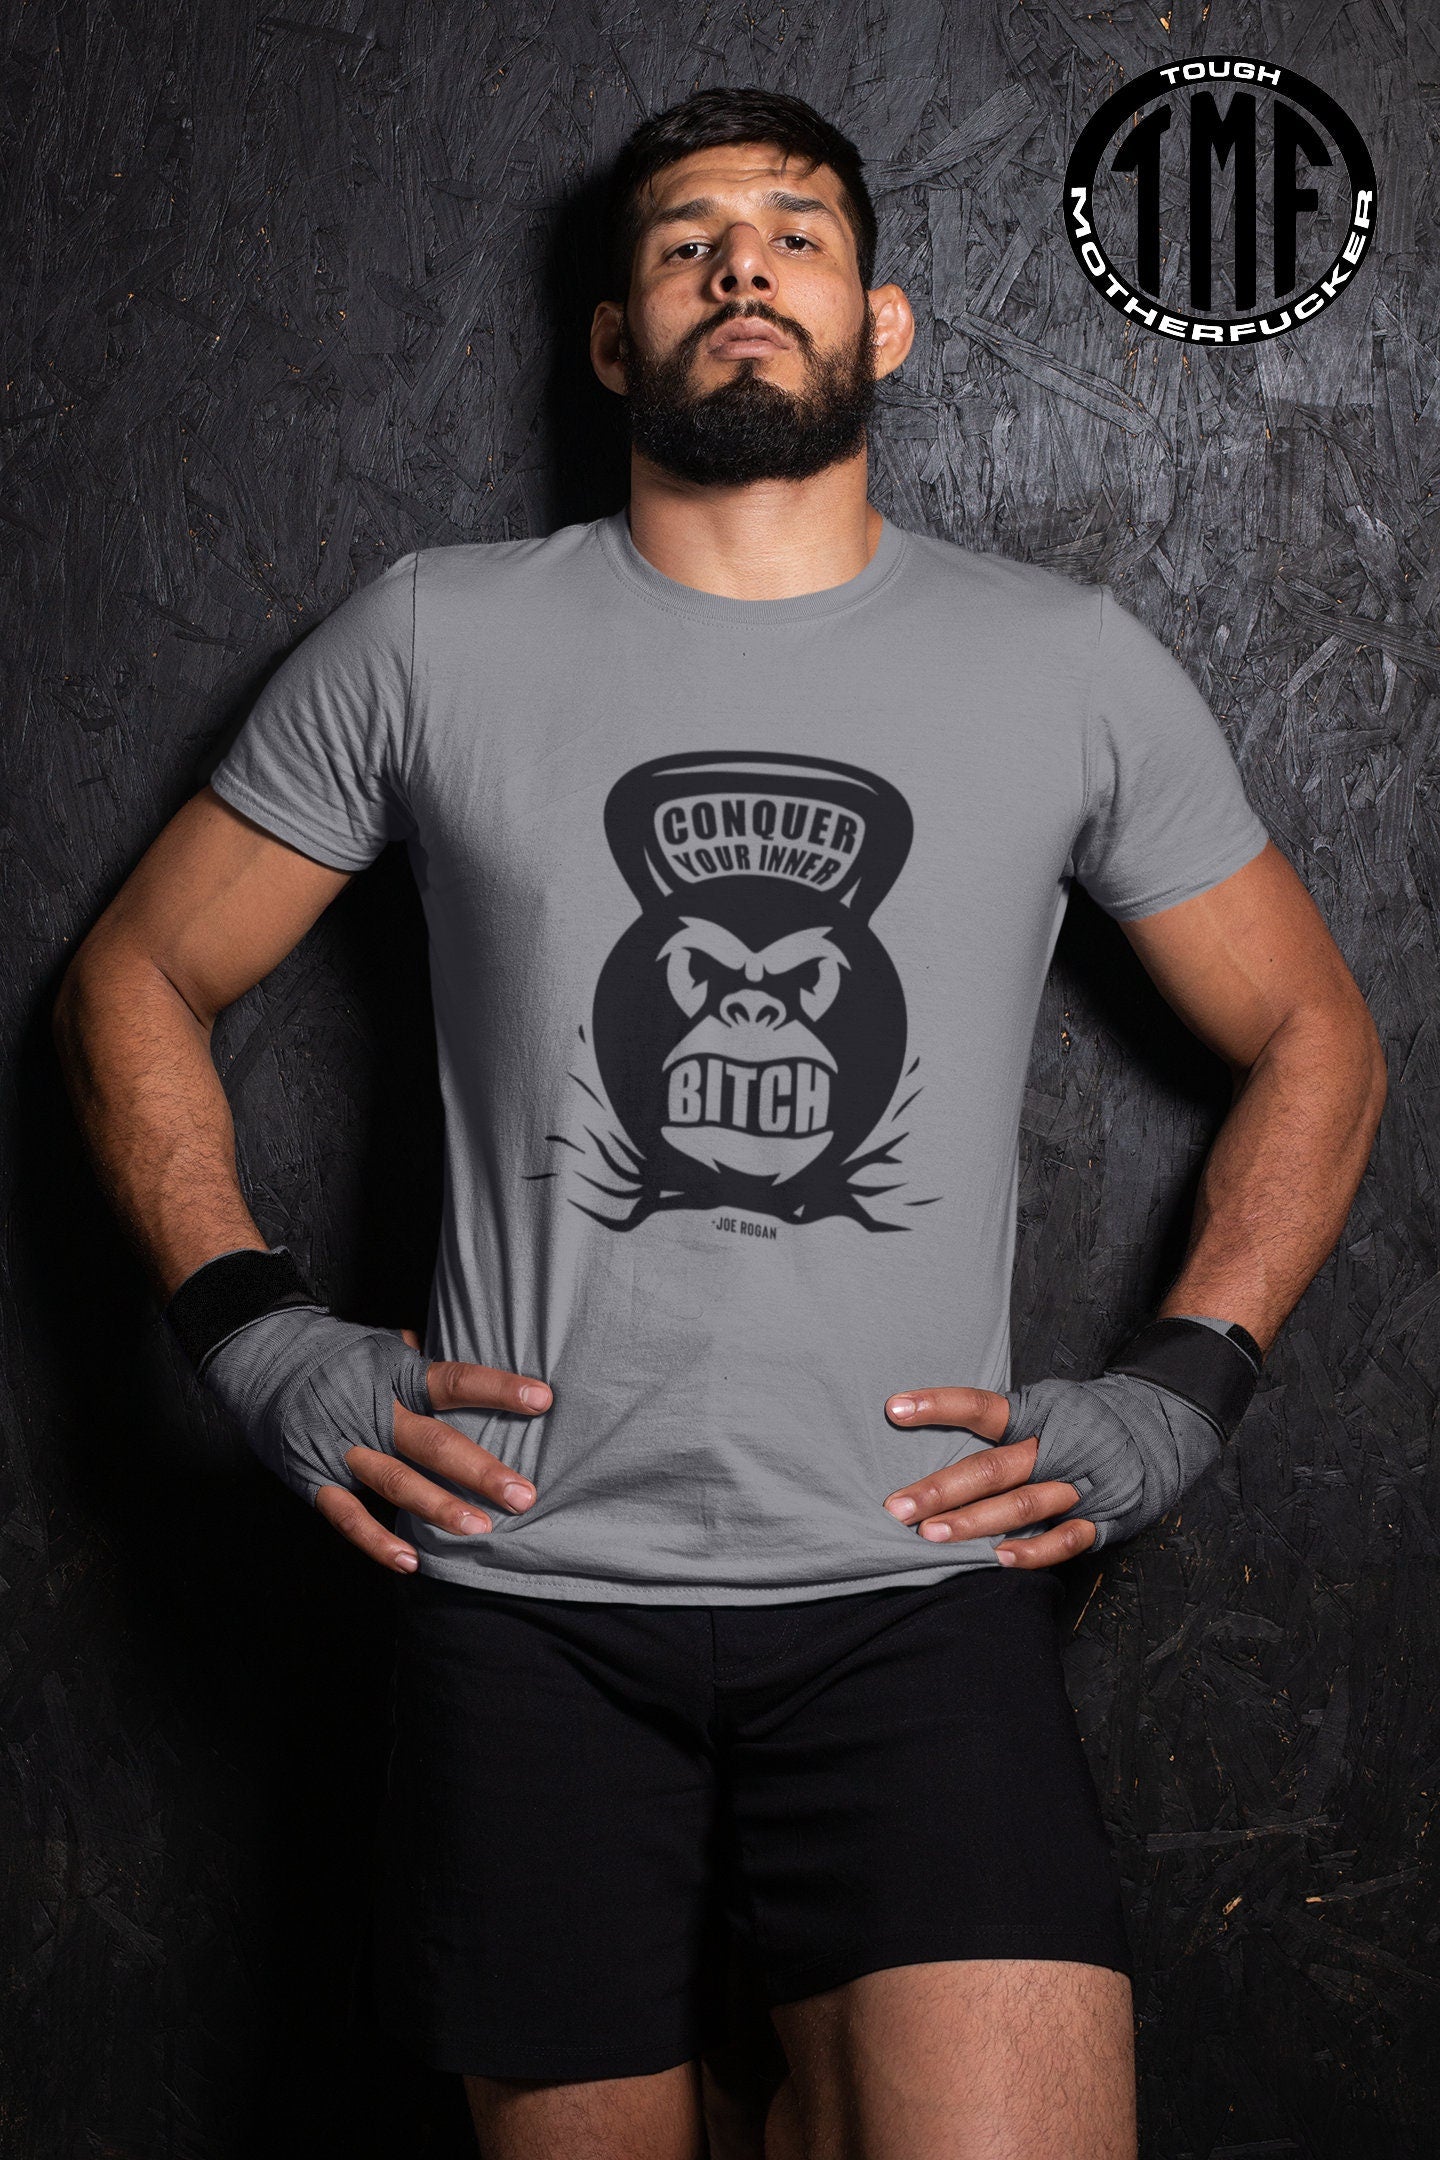 Conquer Your Inner Bitch - Joe Rogan Inspired Workout Graphic T Shirt